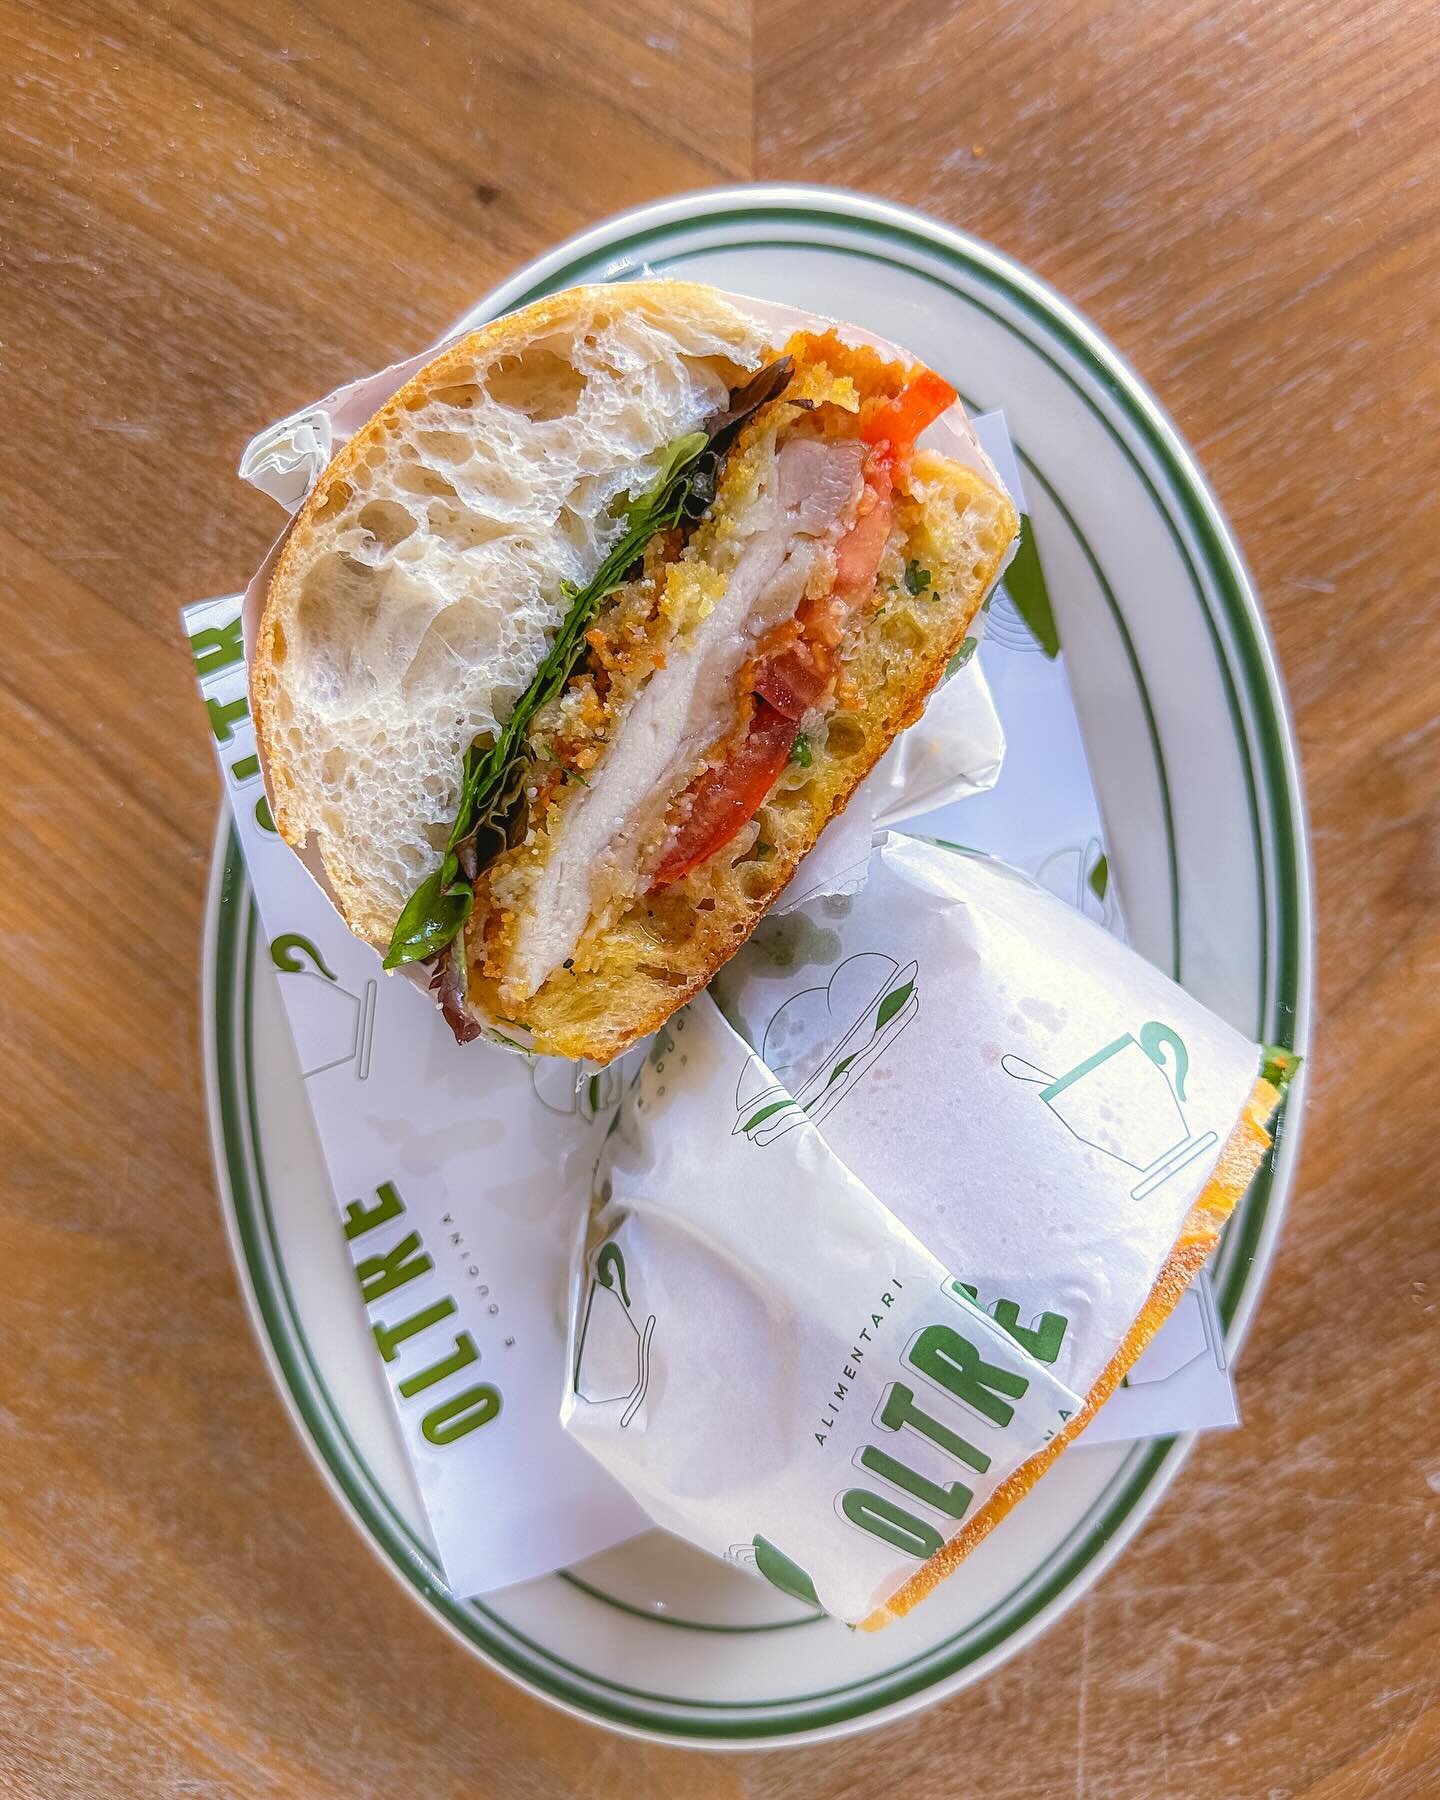 New panino special 🚨 come in and try our Milanese panino. Cotolleta alla Milanese is a tender chicken cooked in crunchy breadcrumbs, fried in butter. Add that to Roma tomatoes, house made gremolata and fresh salad leaves&hellip;buonissimo 😋

&mdash